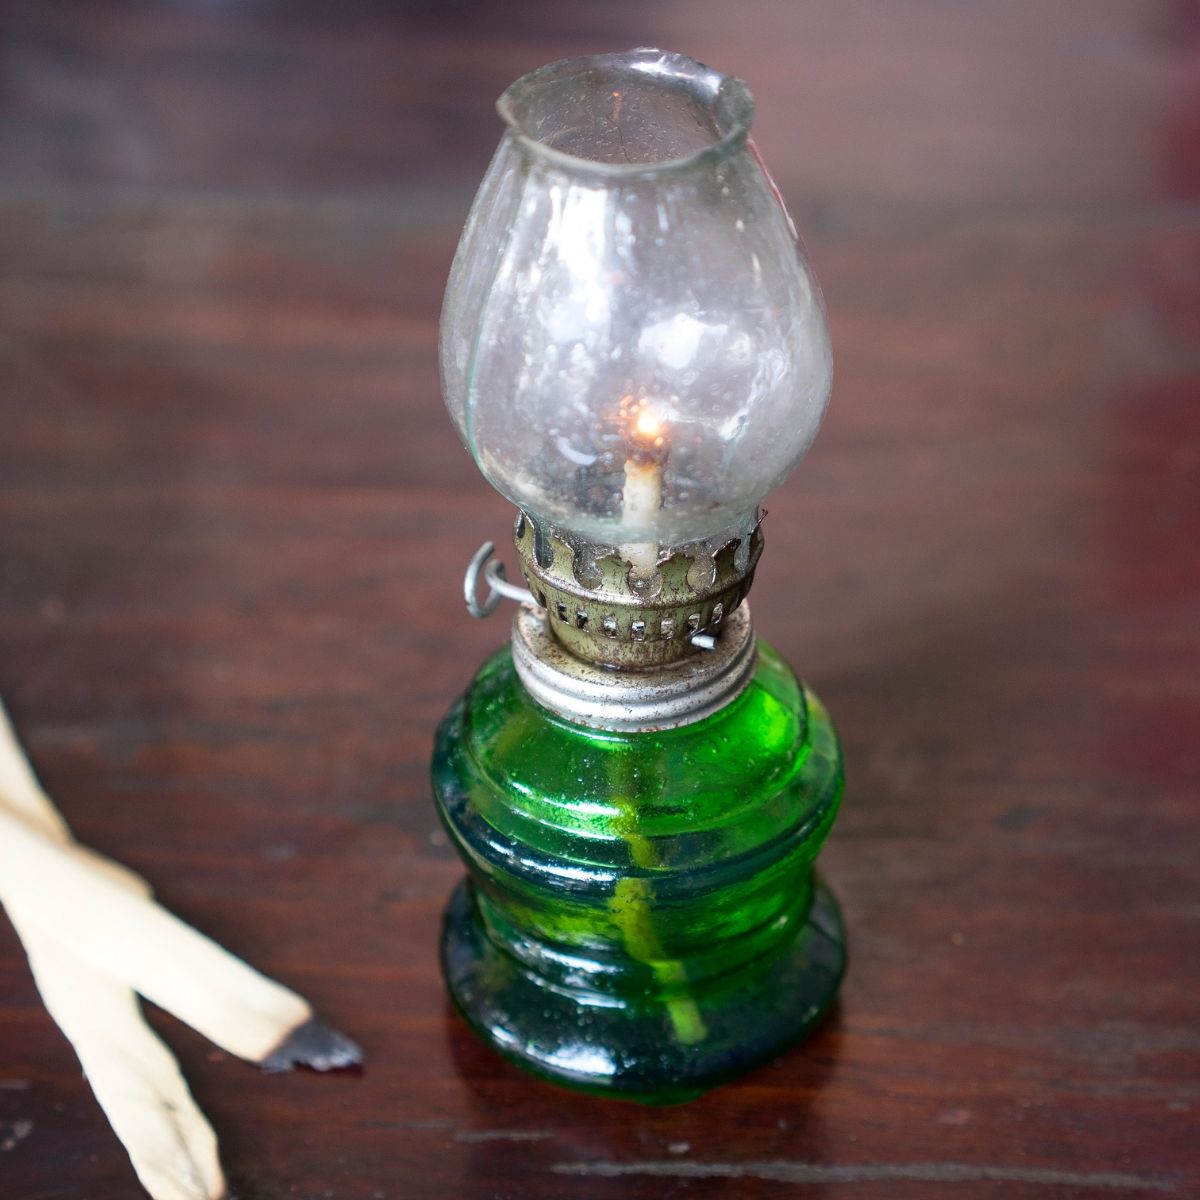 How to clean & maintain oil lamps